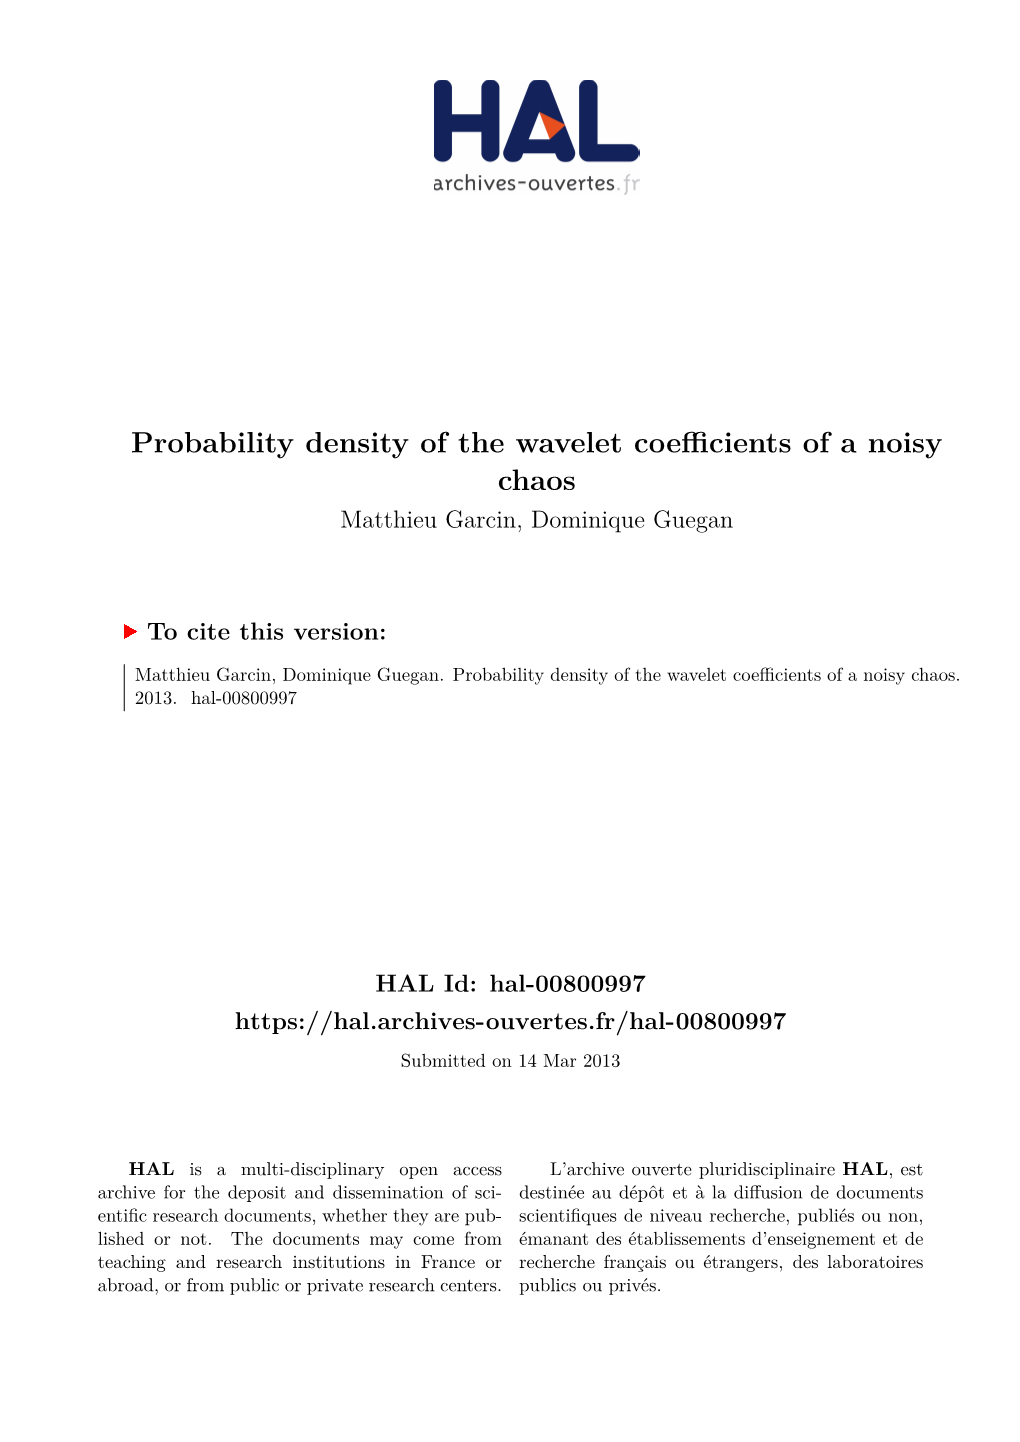 Probability Density of the Wavelet Coefficients of a Noisy Chaos